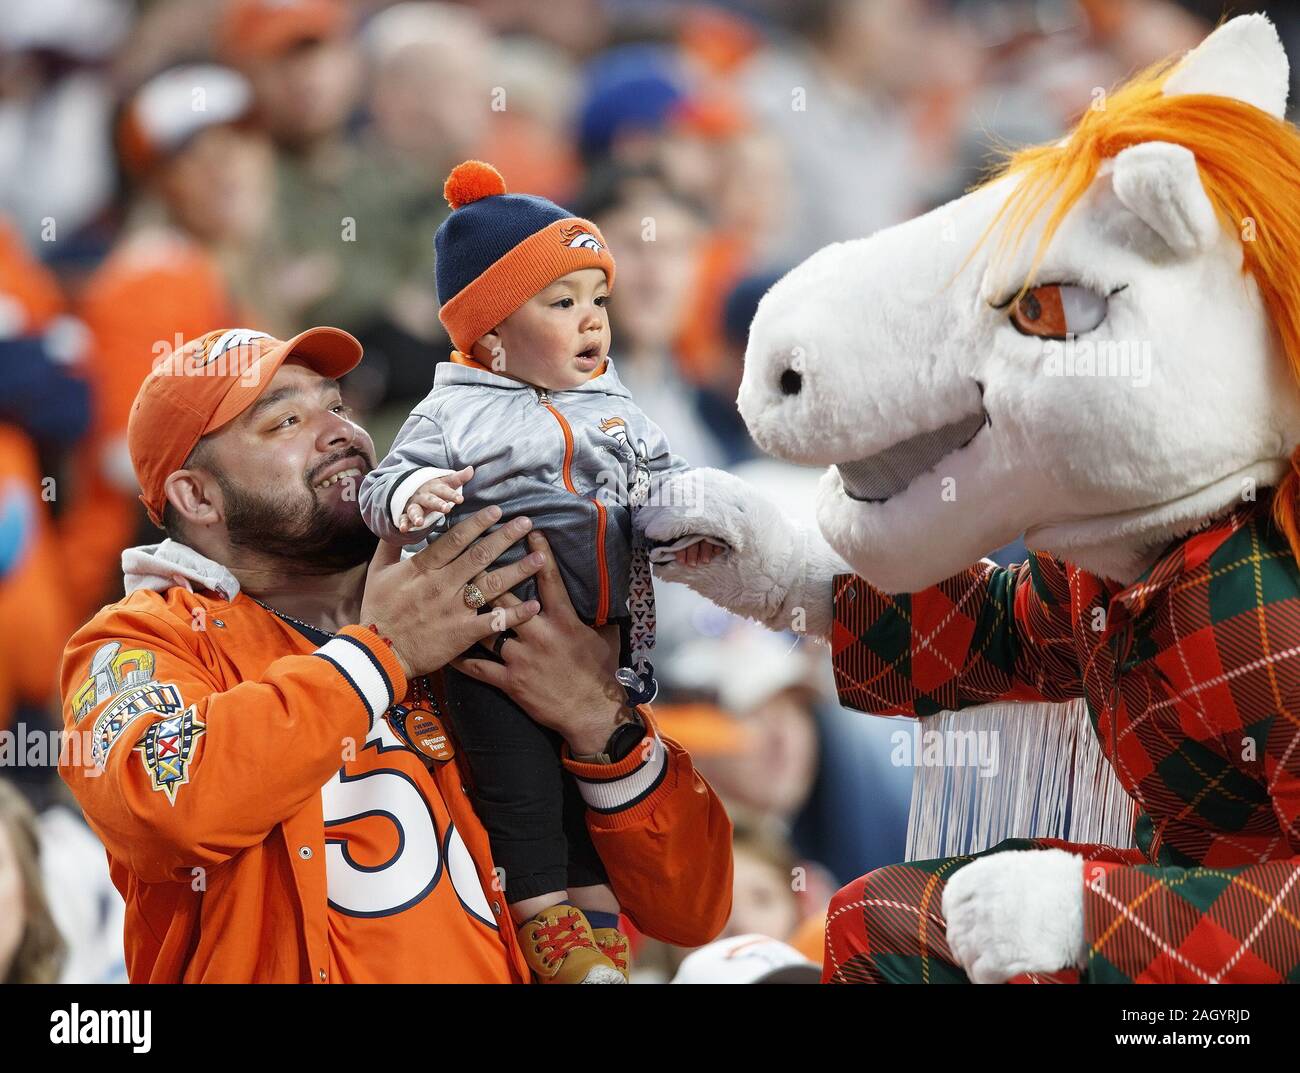 Denver, Colorado, USA. 22nd Dec, 2019. A young Denver Broncos fan meets Denver Broncos mascot ''Miles'' during the 2nd half of an NFL game between the Denver Broncos and the Detroit Lions at Empower Field at Mile High. Credit: Hector Acevedo/ZUMA Wire/Alamy Live News Stock Photo